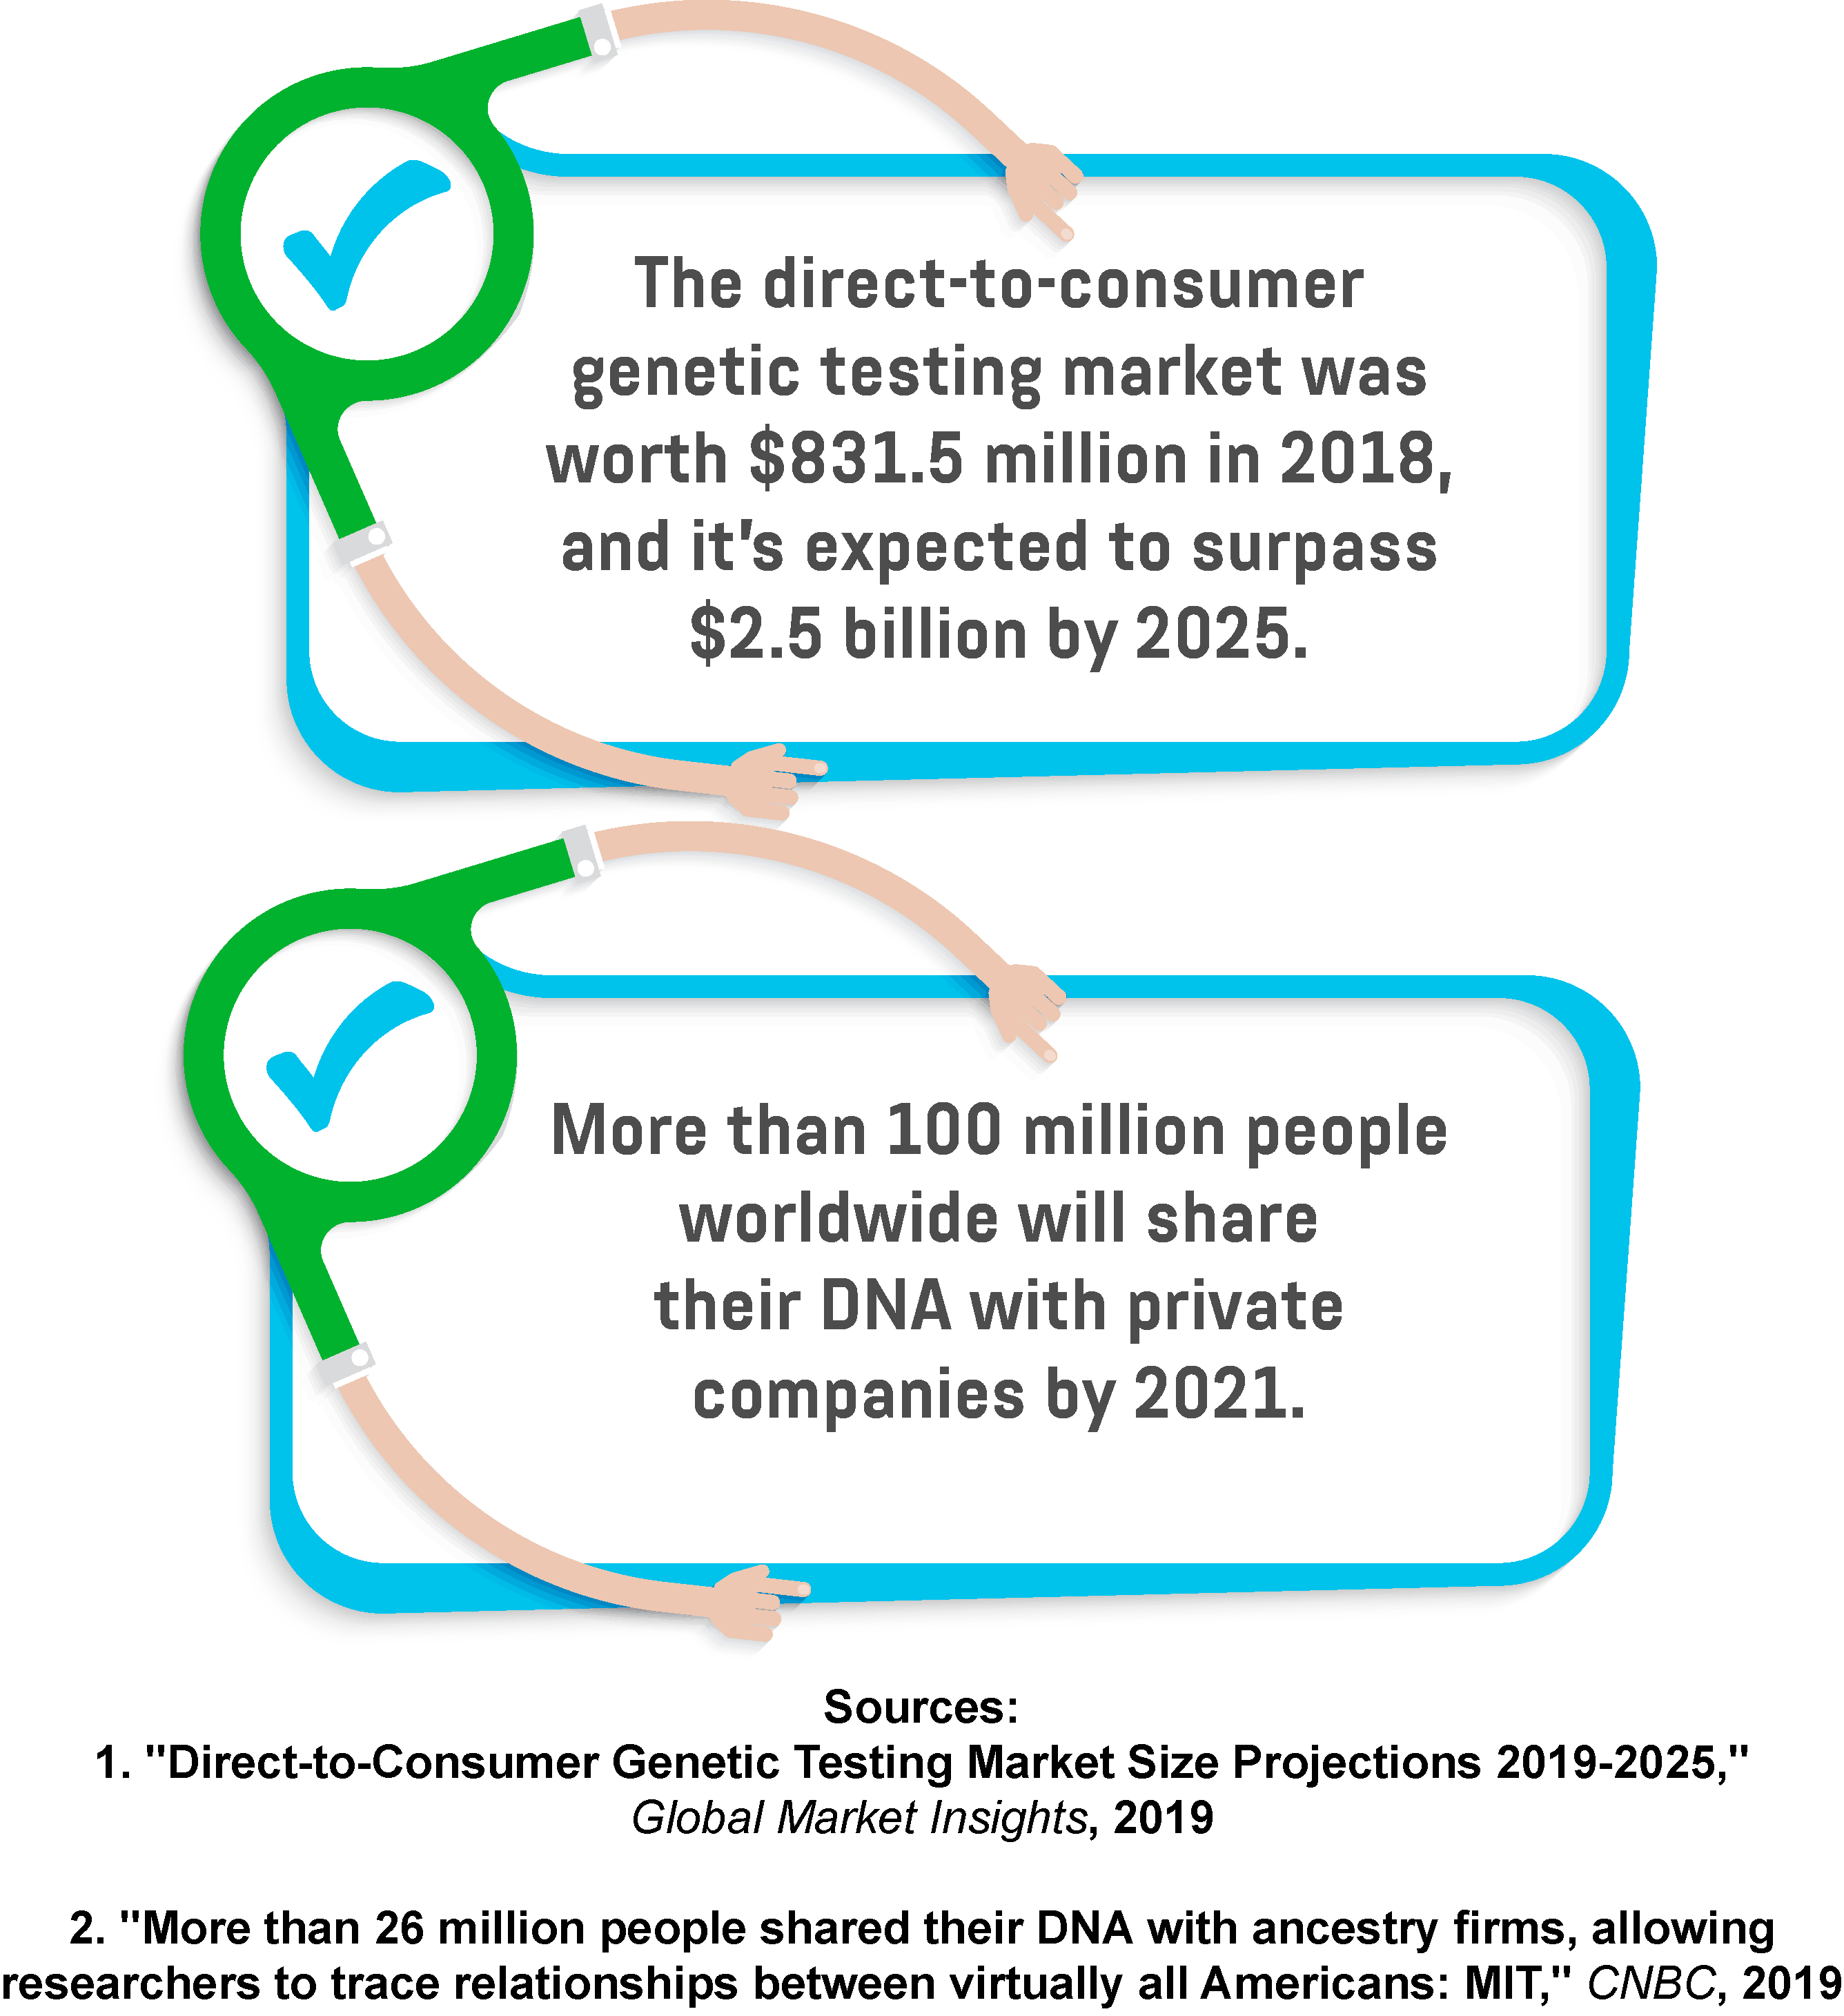 An infographic showing the size of the direct-to-consumer genetic testing market in 2018 and the forecasted value in 2025, as well as how many people will share their DNA with private companies by 2021.